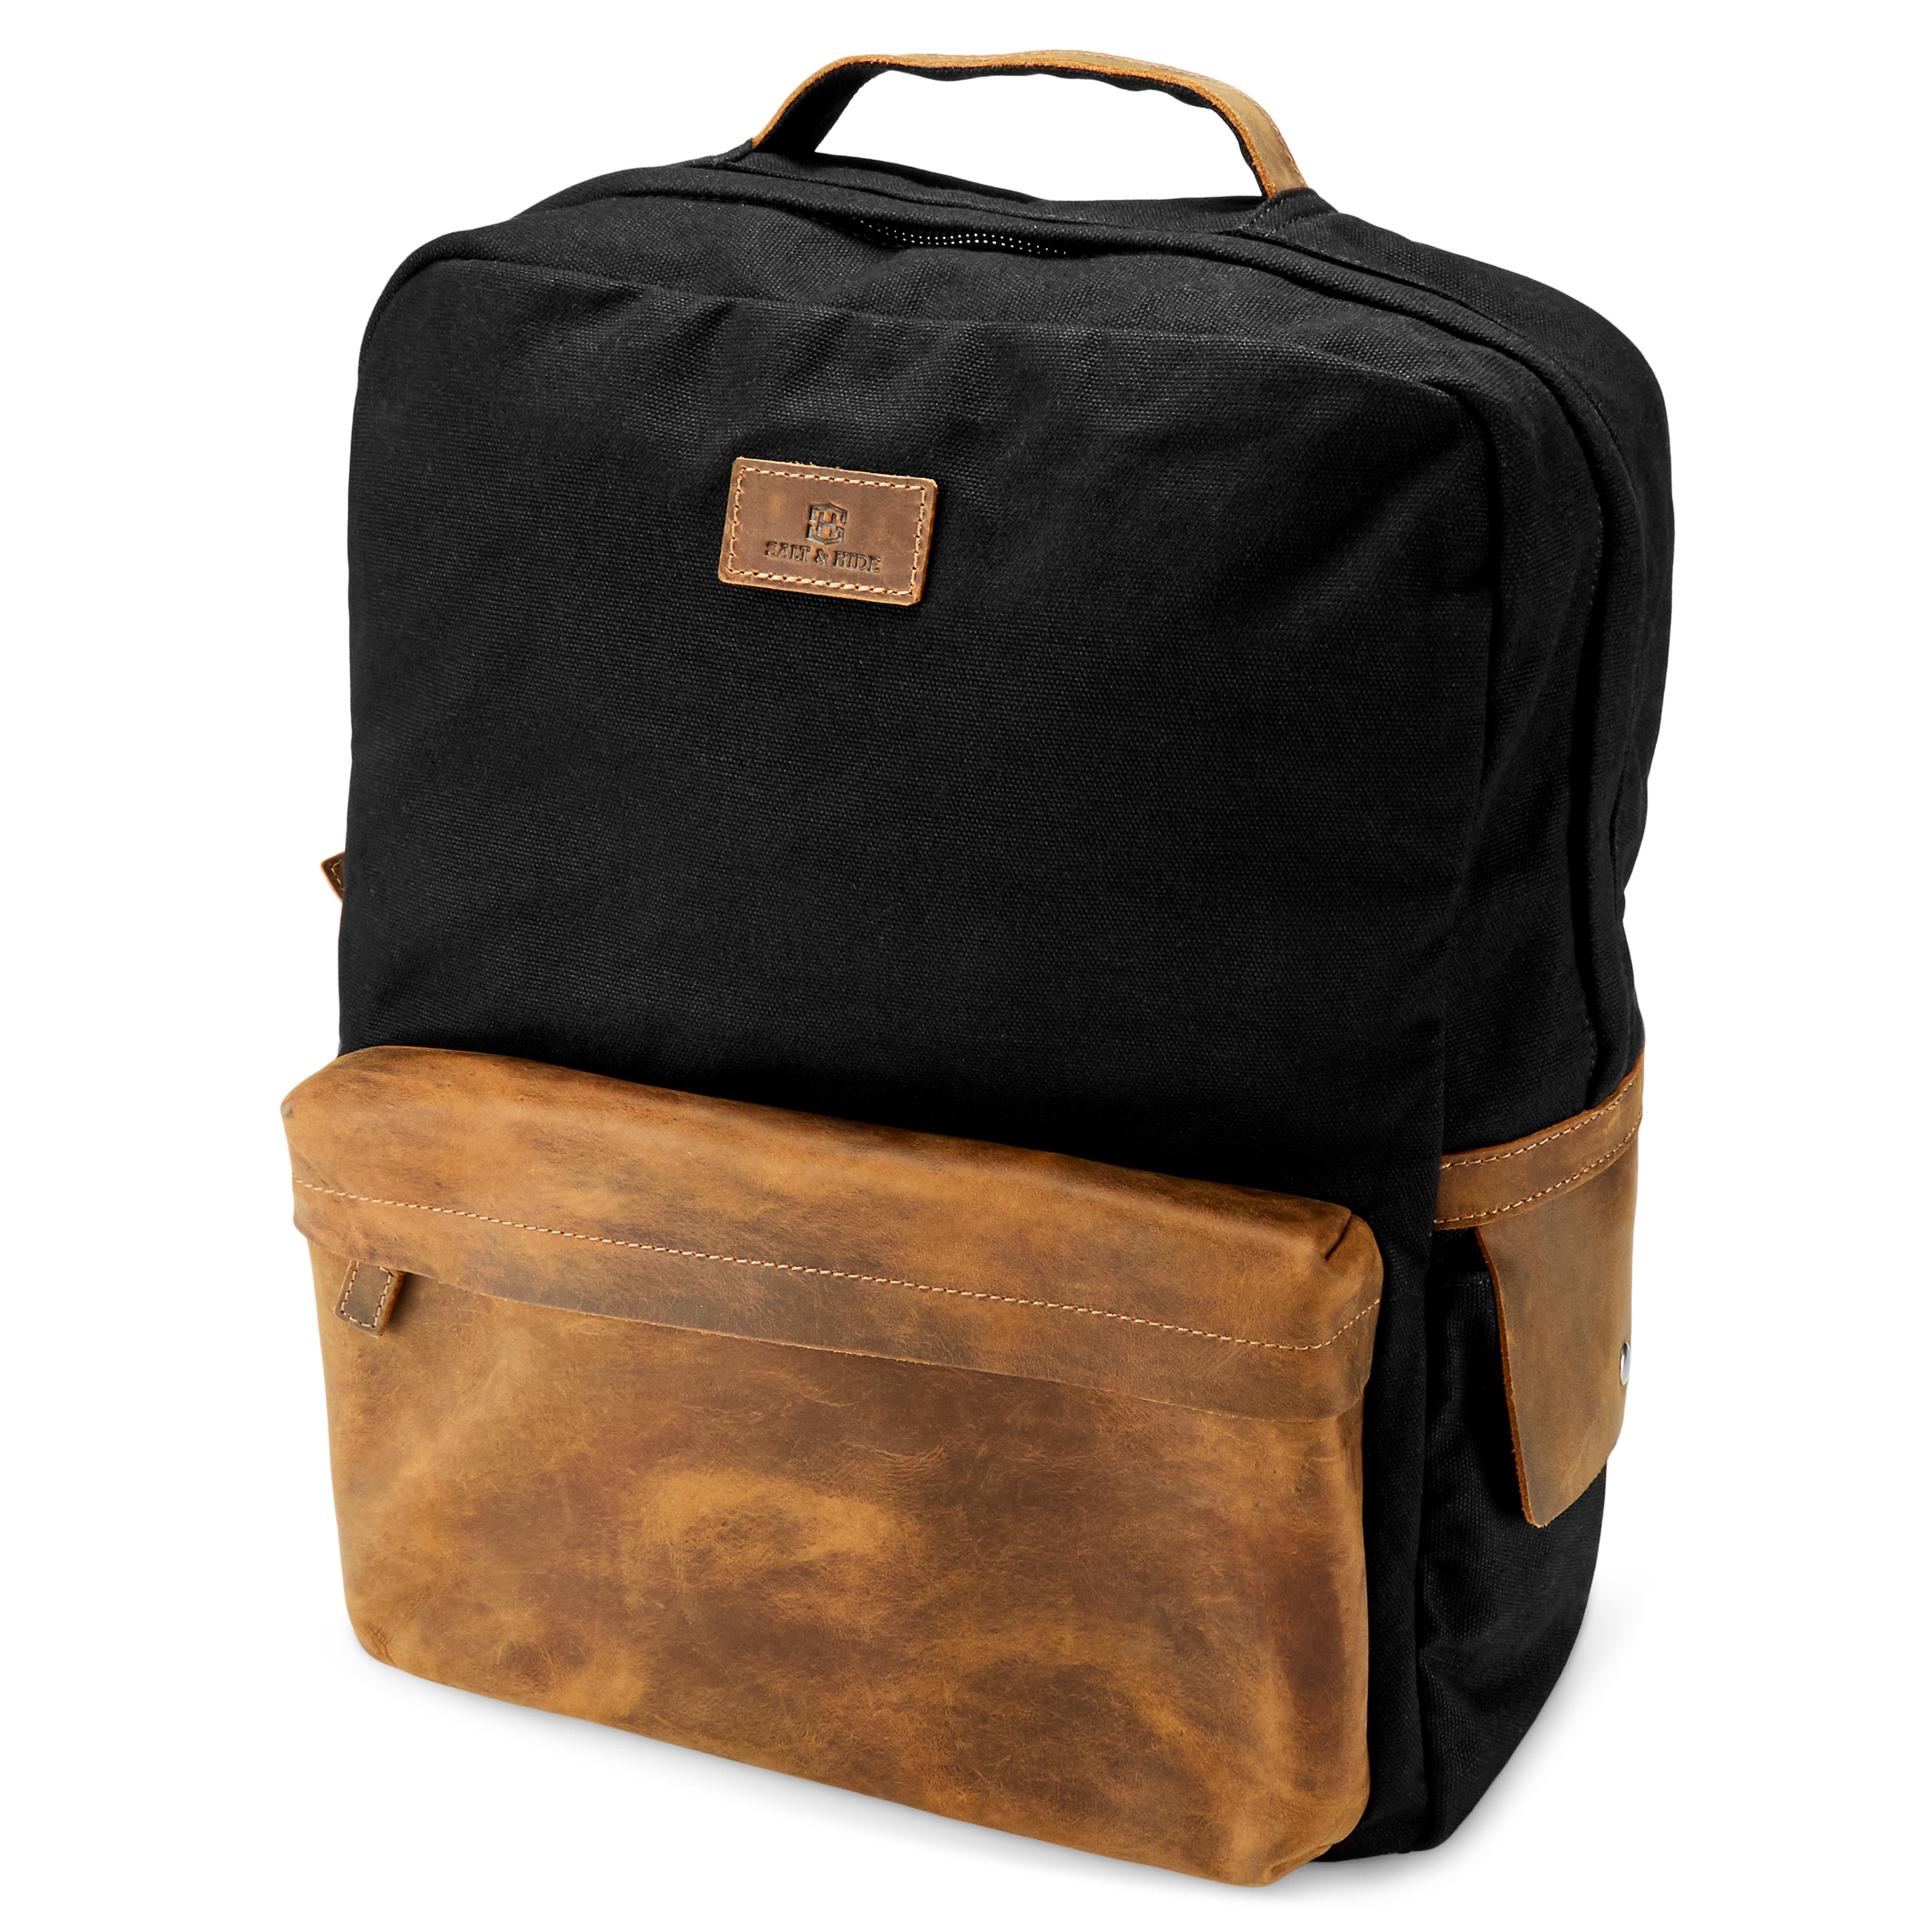 Tarpa | Black Canvas & Tan Leather Backpack